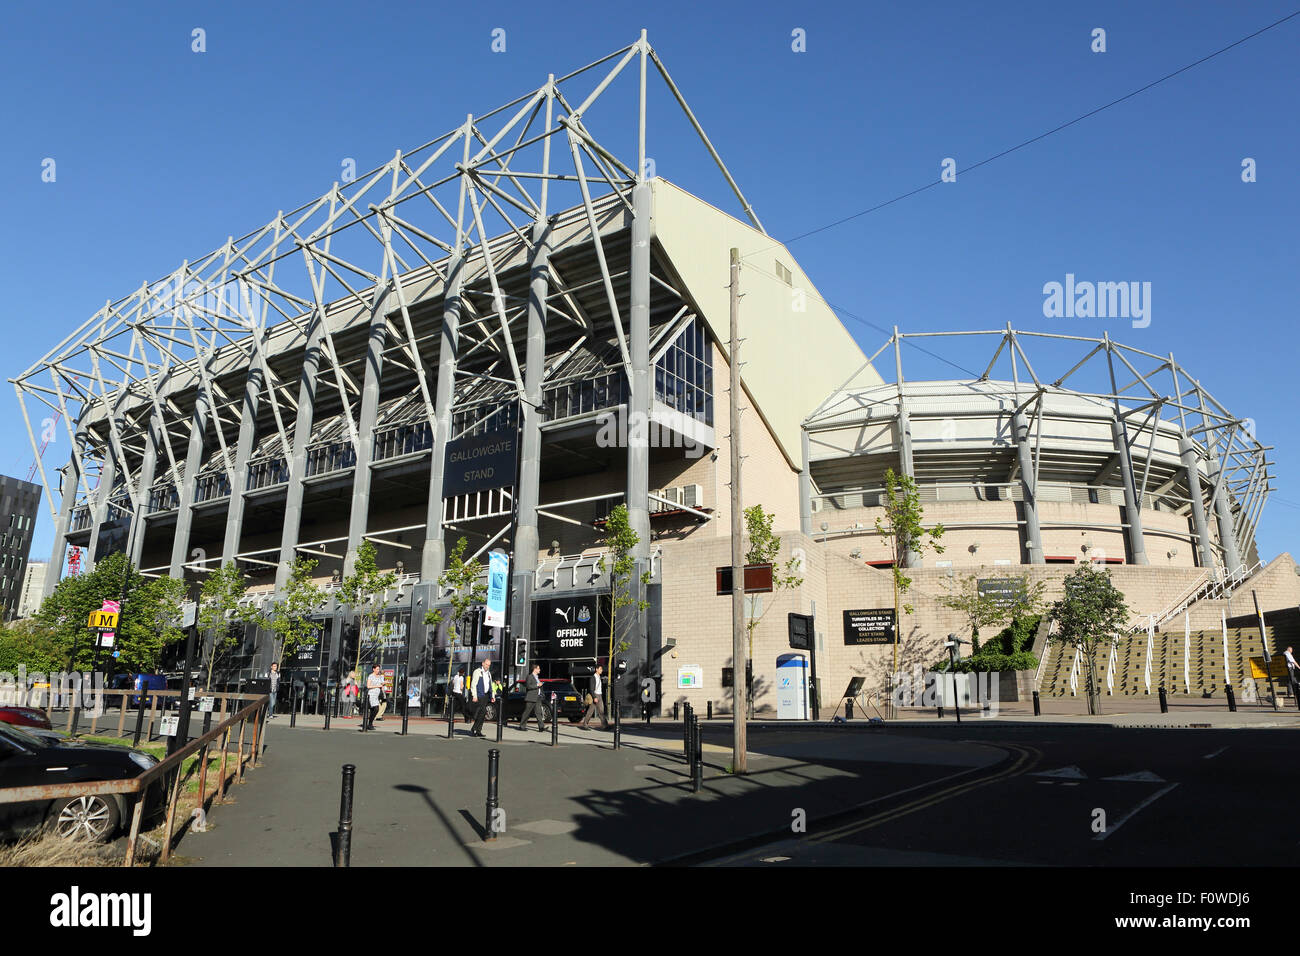 St James Park Stadium In Newcastle Upon Tyne England Newcastle United Football Club Play Their Homes Games At The Stadium Stock Photo Alamy